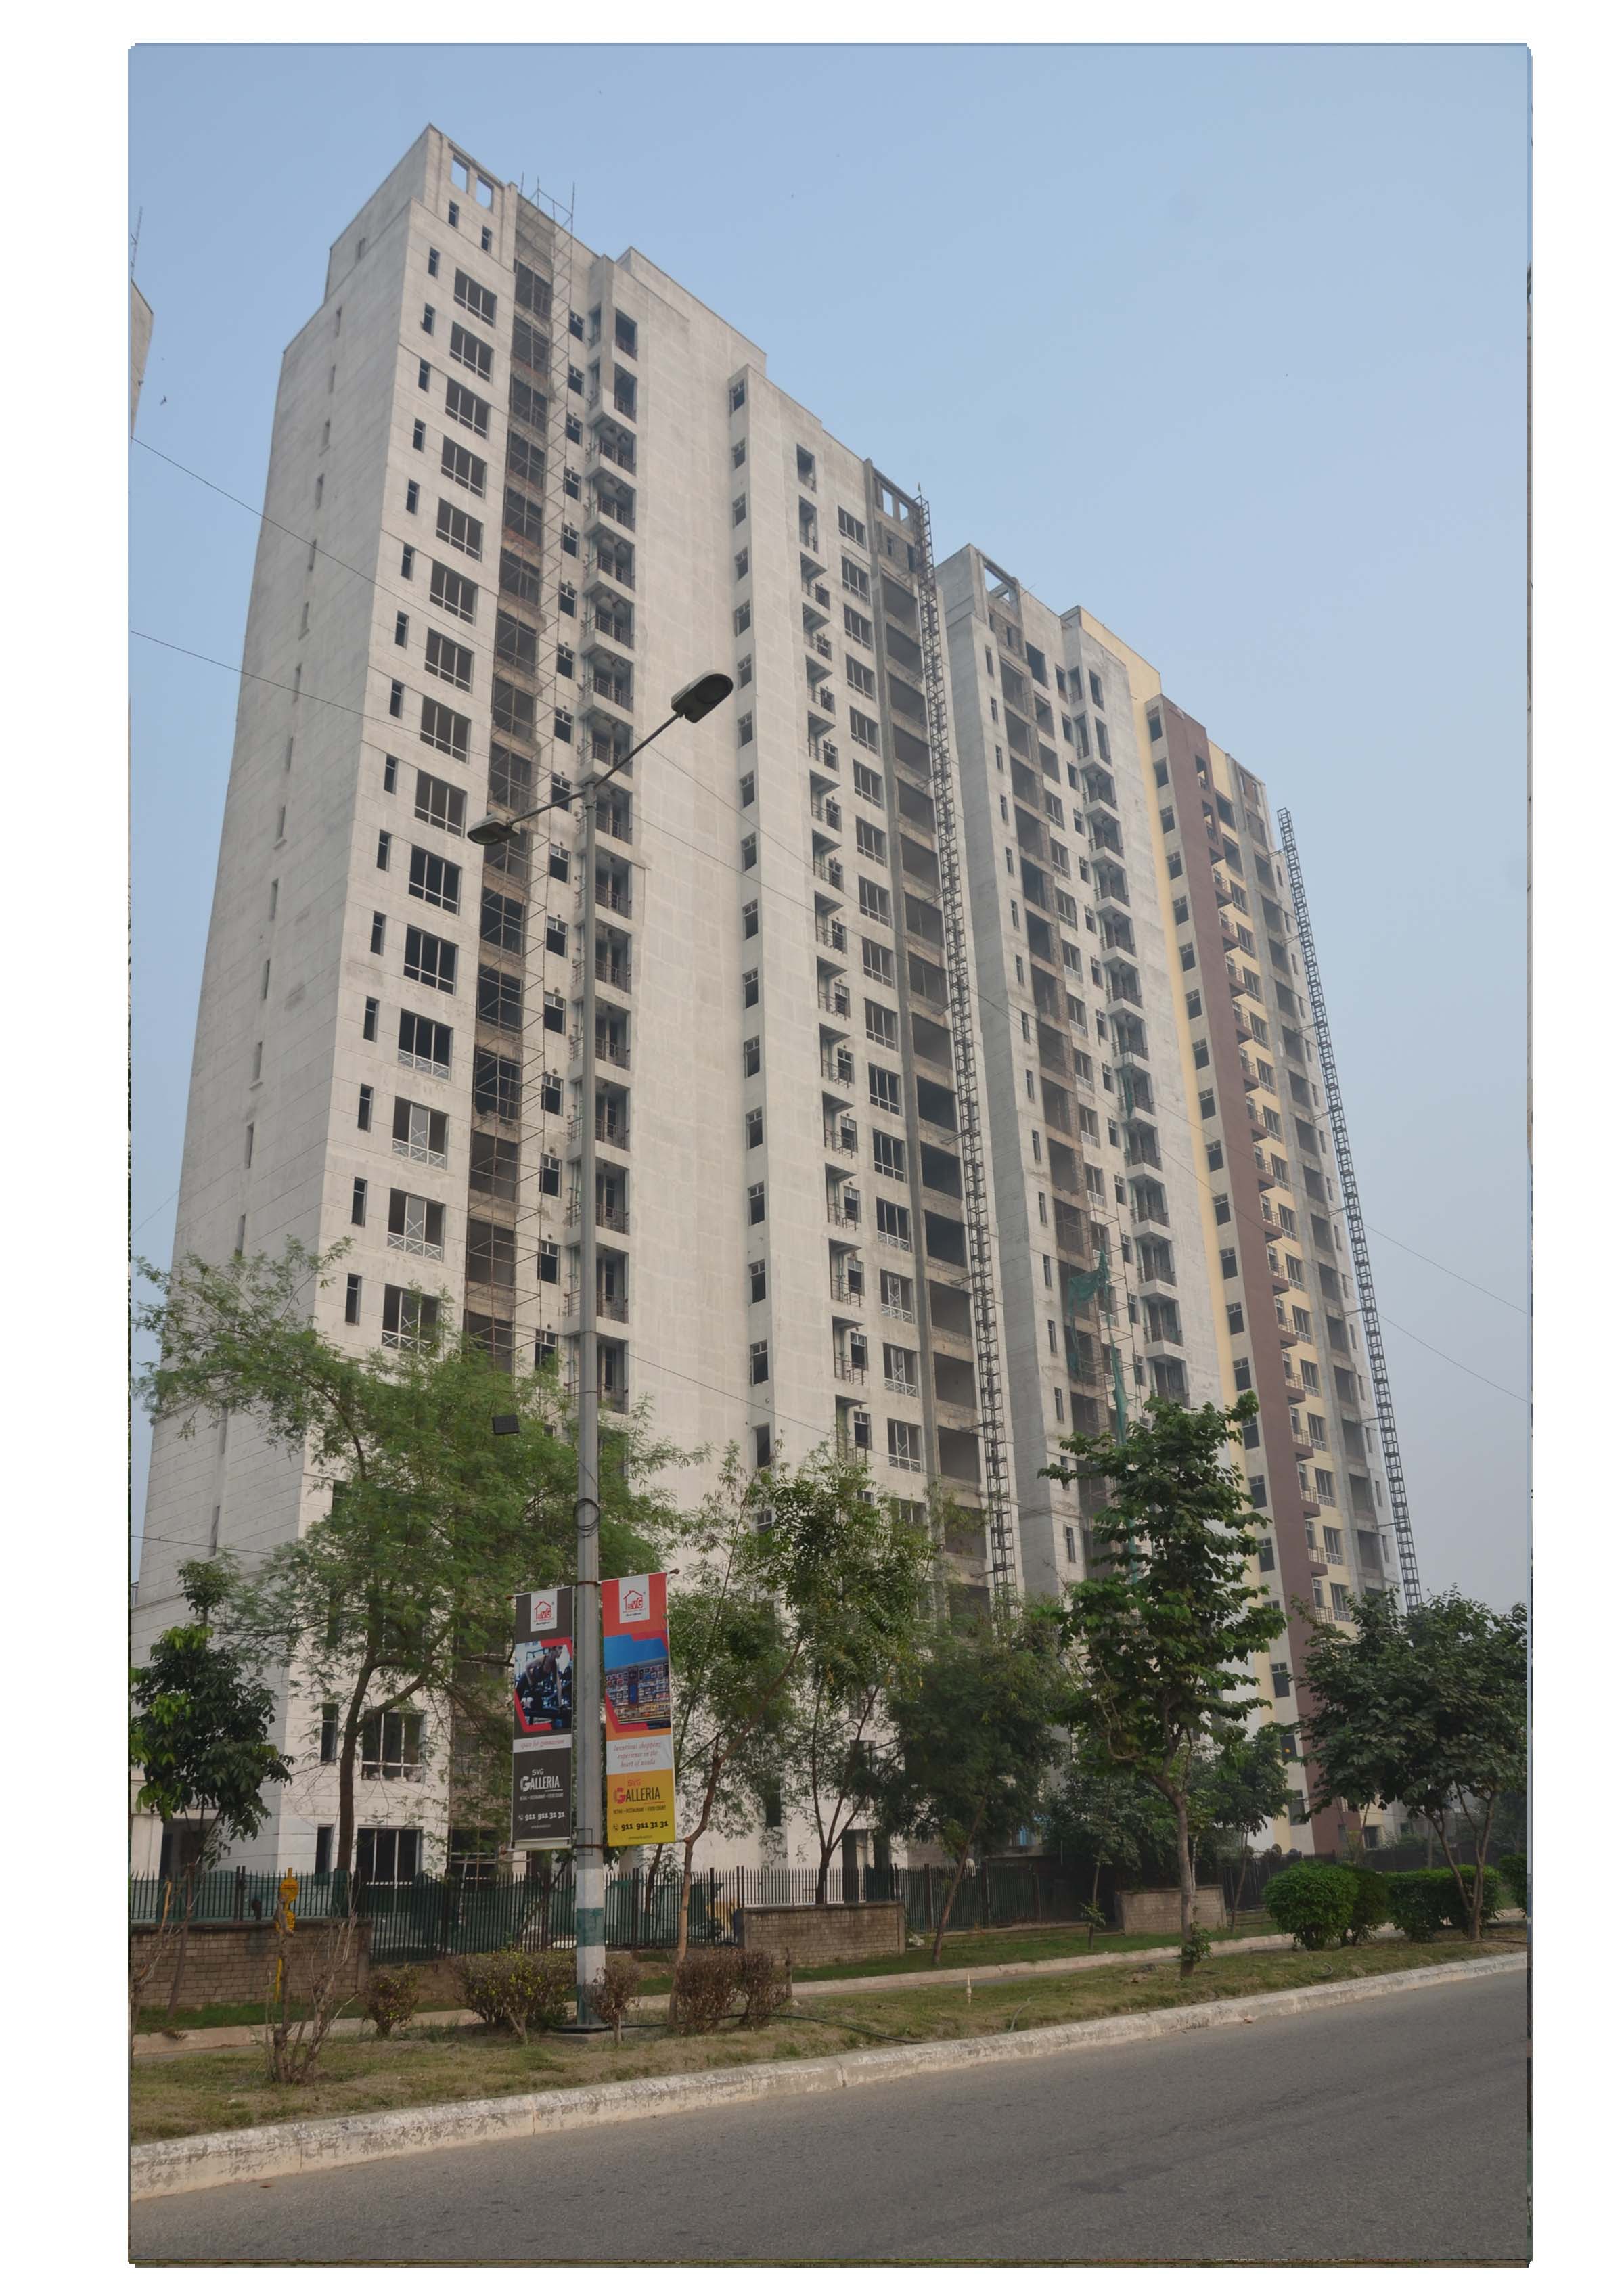 Long View of Towers-6 and 7